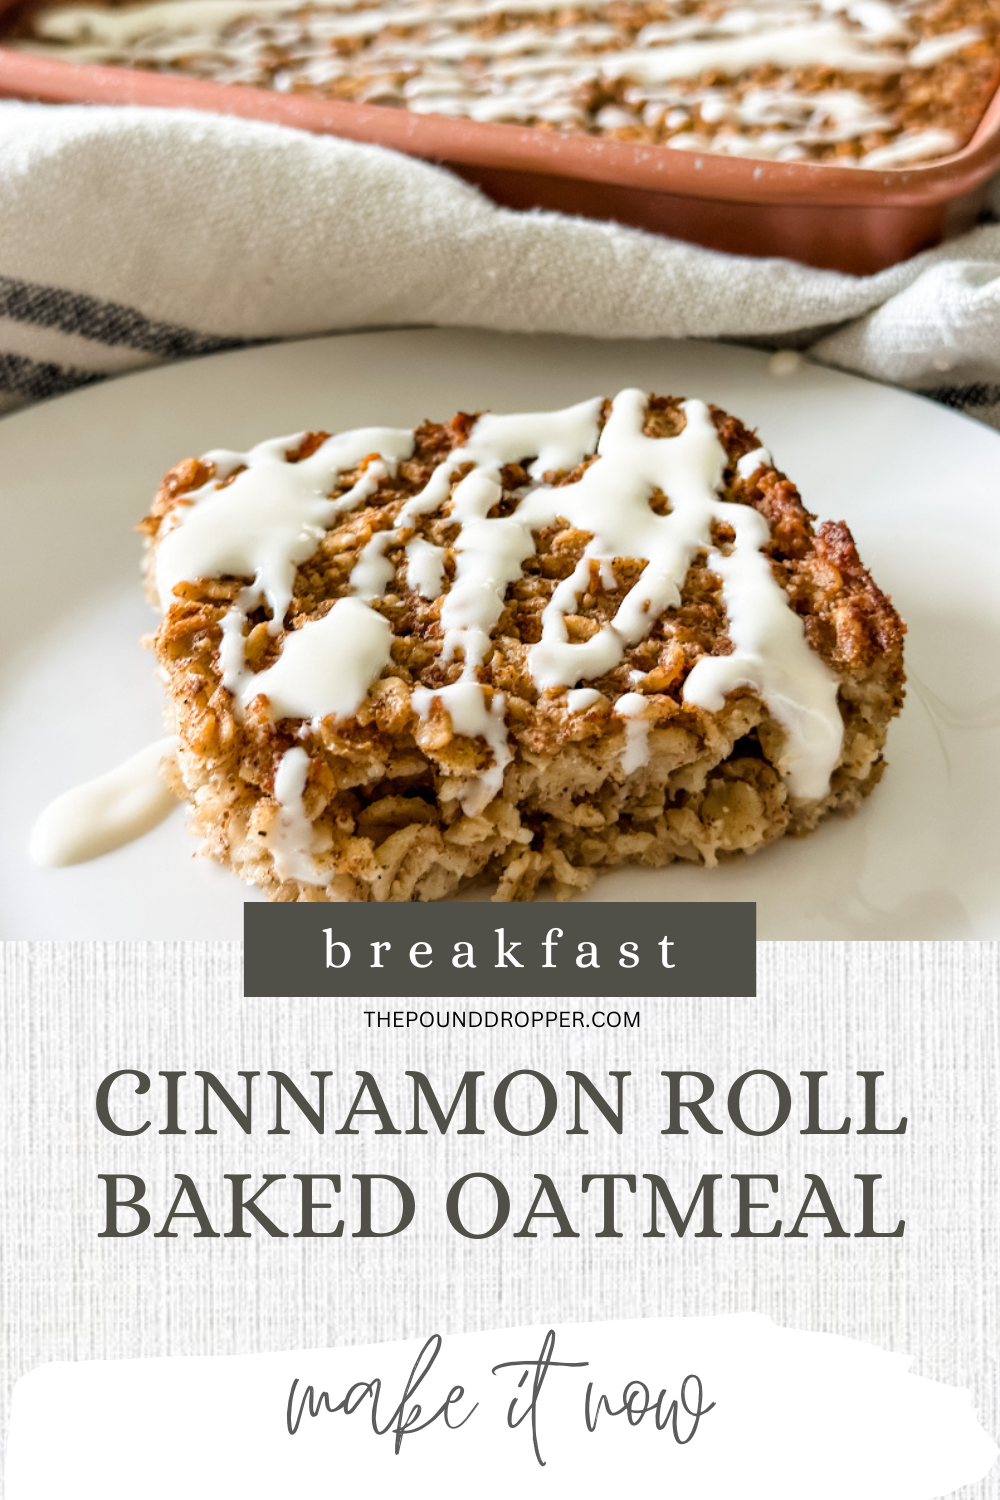 This Cinnamon Roll Baked Oatmeal Bake is a warm breakfast oatmeal bake made from pantry ingredients-oats, ground cinnamon, nutmeg, egg, and unsweetened almond milk. An easy breakfast that tastes like a warm gooey cinnamon roll in via @pounddropper